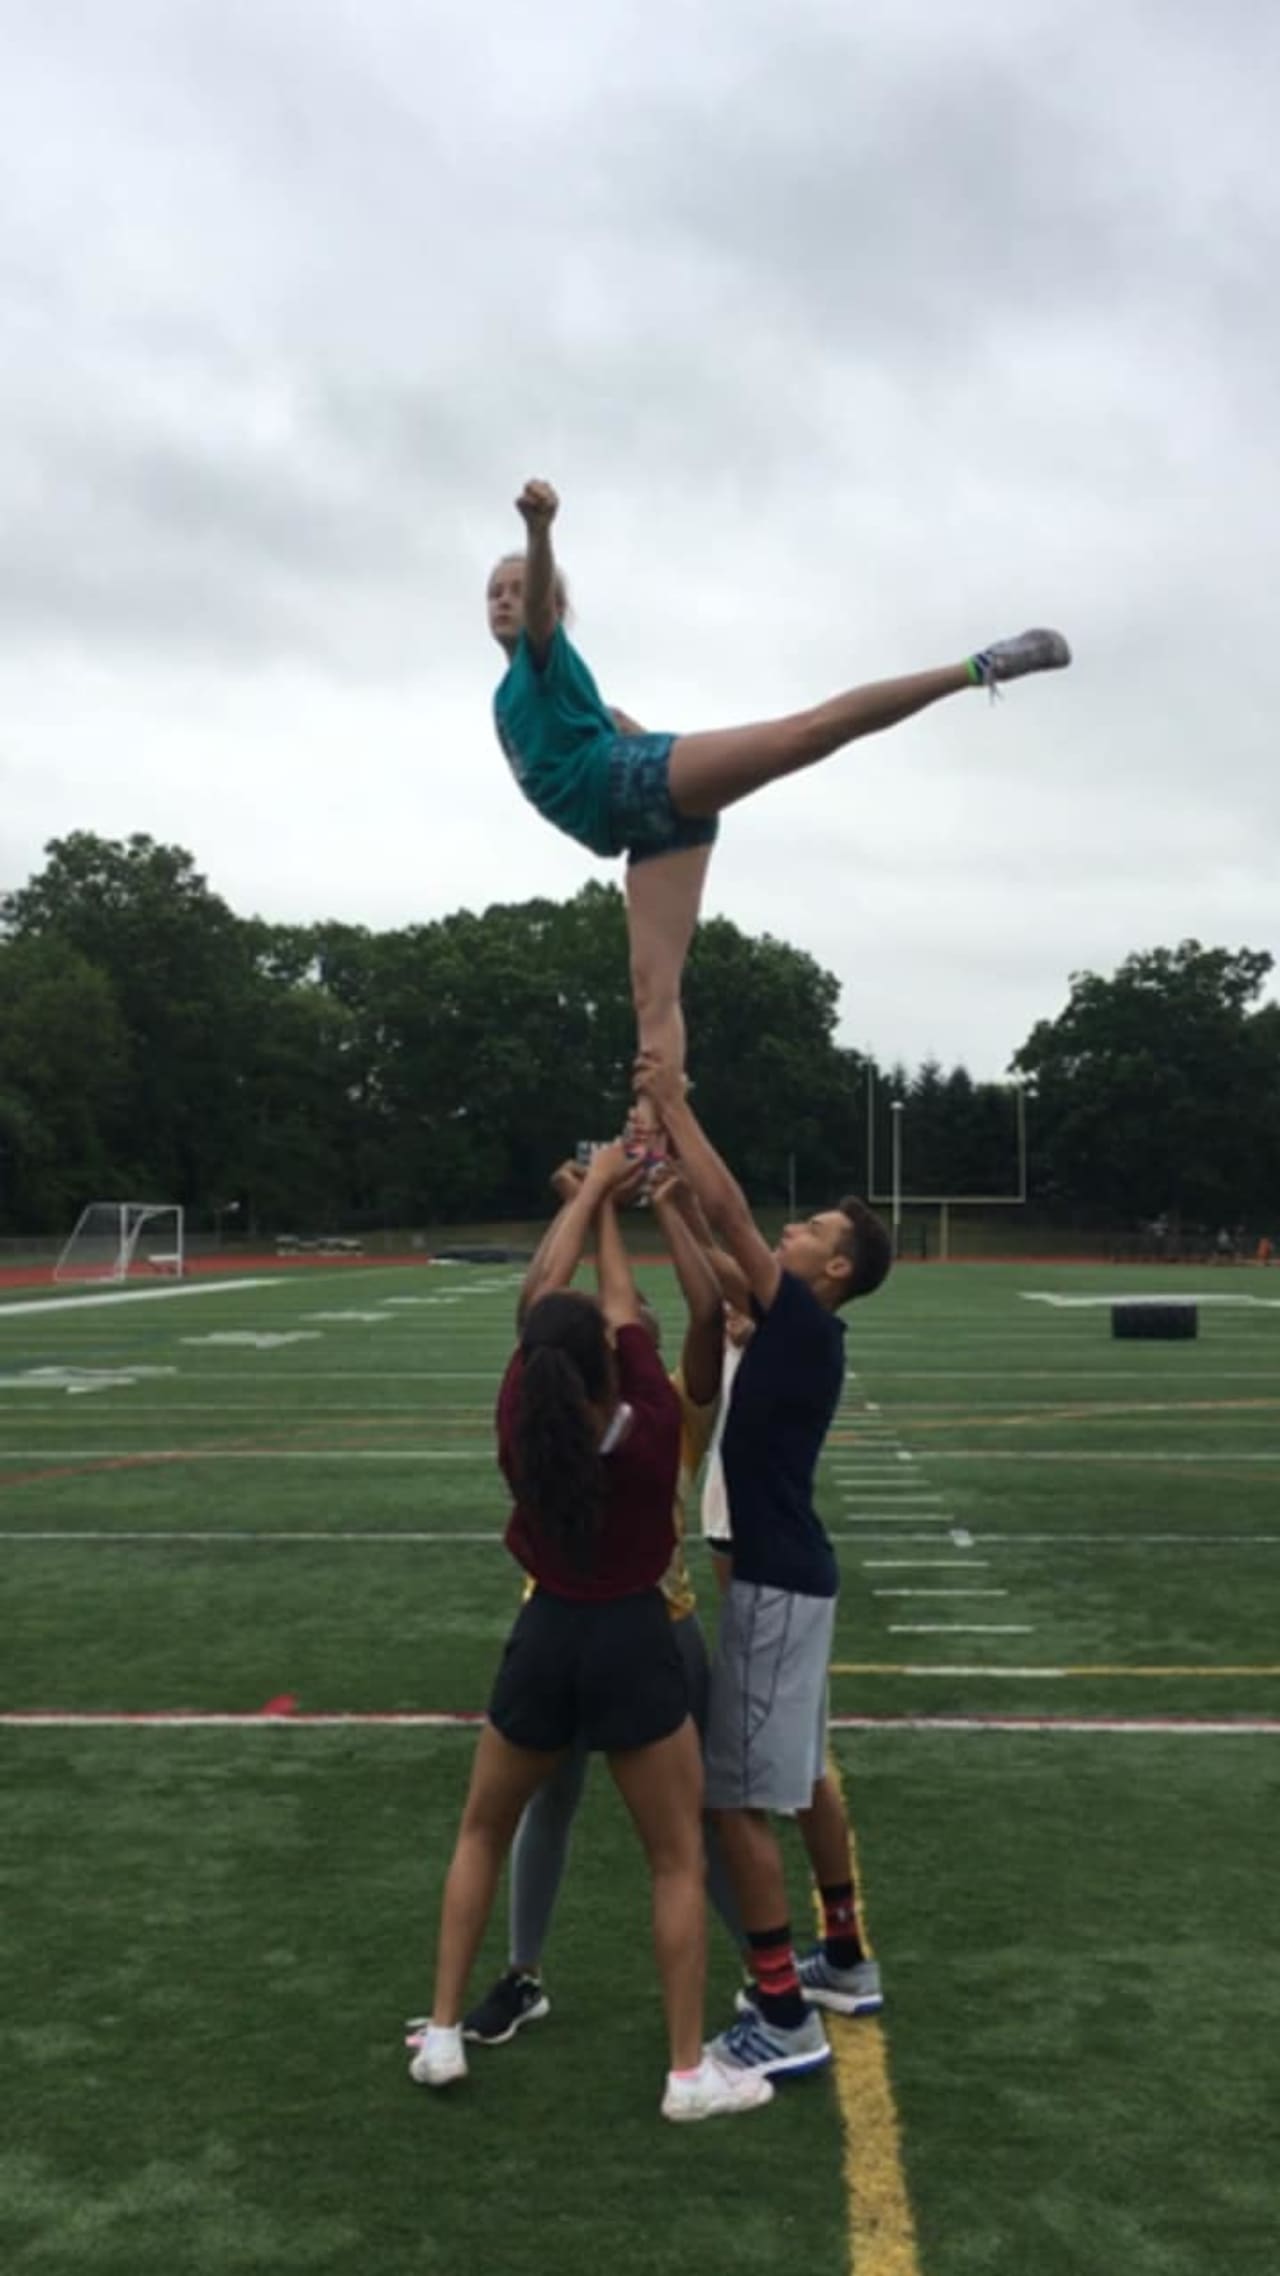 The NHS Bears Cheerleaders are raising money to attend summer camp at the National Cheerleading Associations – Lake Bryn Mawr Camp in Honesdale, PA.